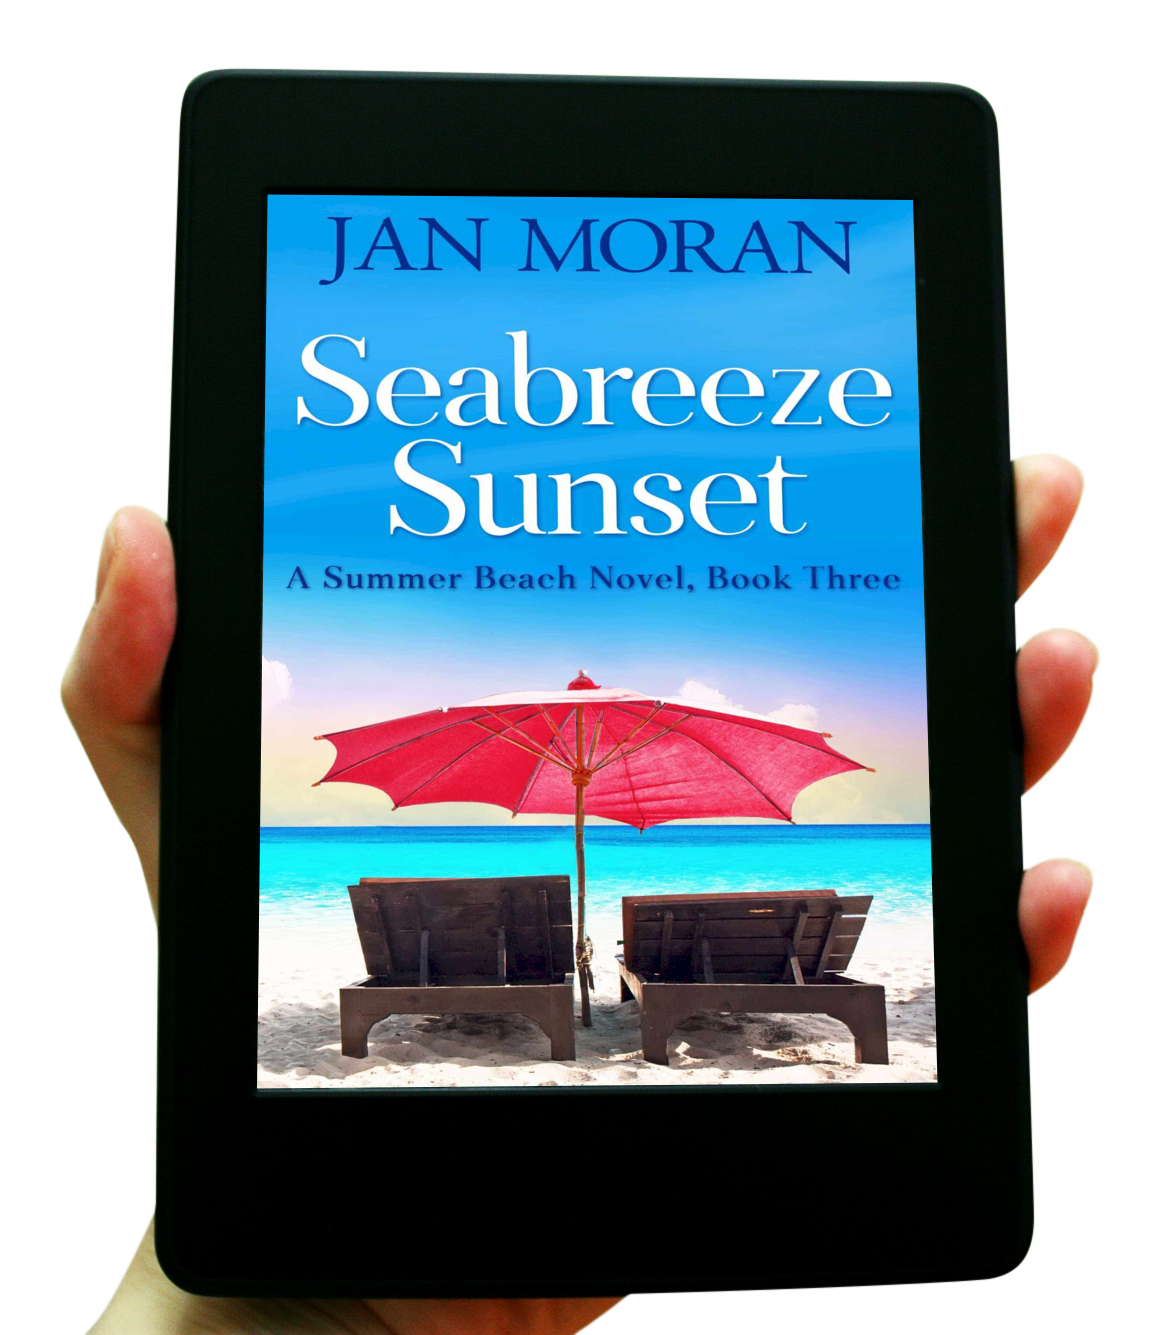 Seabreeze Sunset Ebook Jan Moran Clean and Wholesome Women's Fiction